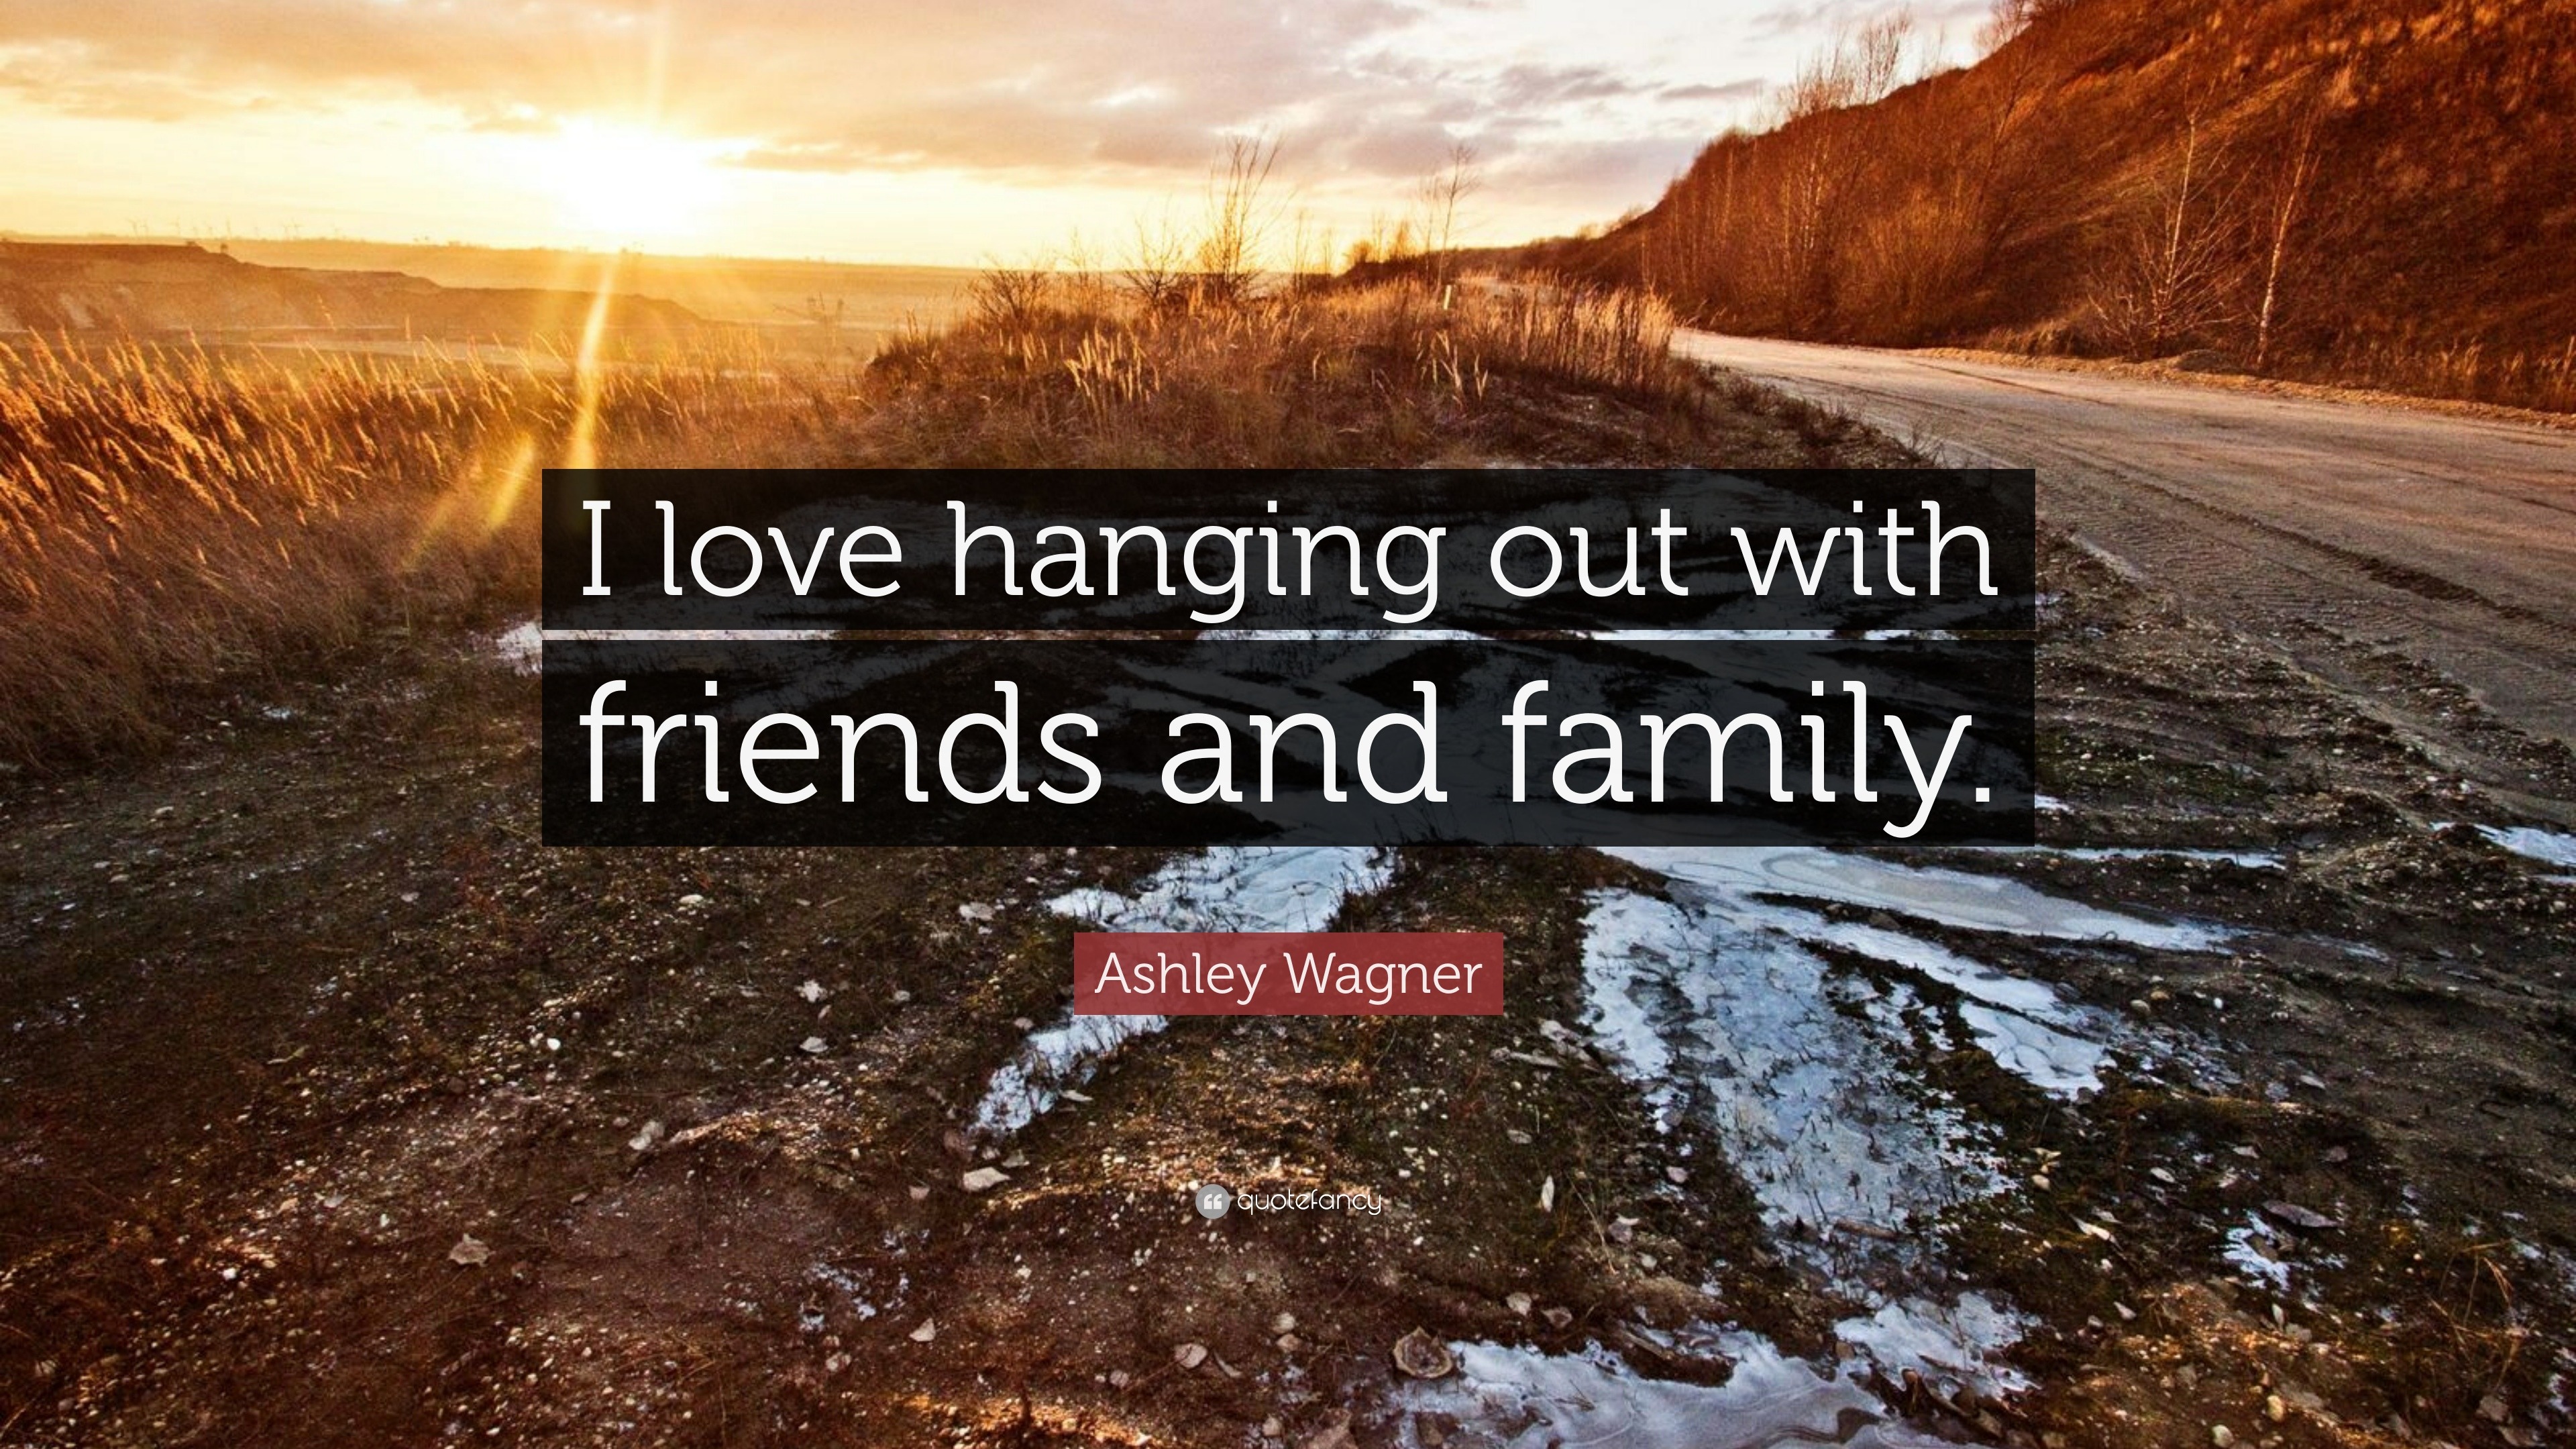 Ashley Wagner Quote: “I love hanging out with friends and family.”